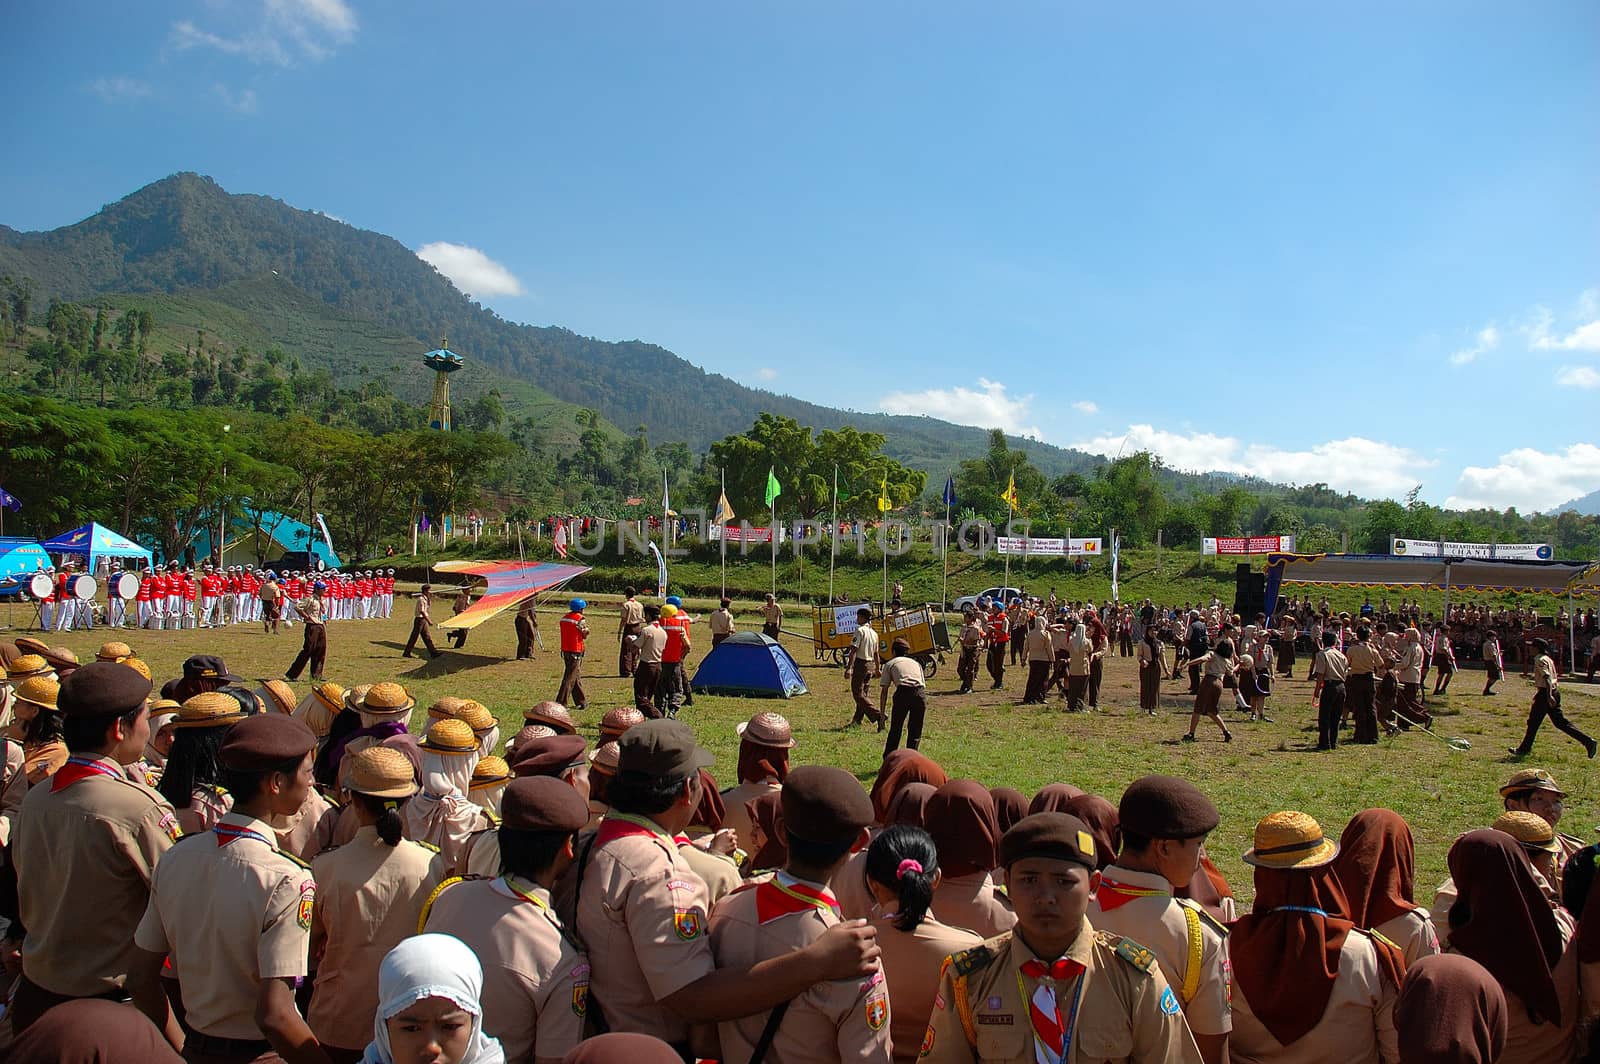 Jatinangor, Indonesia - July 9, 2007: Indonesian rover scout gathered together to attend Regional Rover Moot at Jatinangor Camp Area, Sumedang-Indonesia.